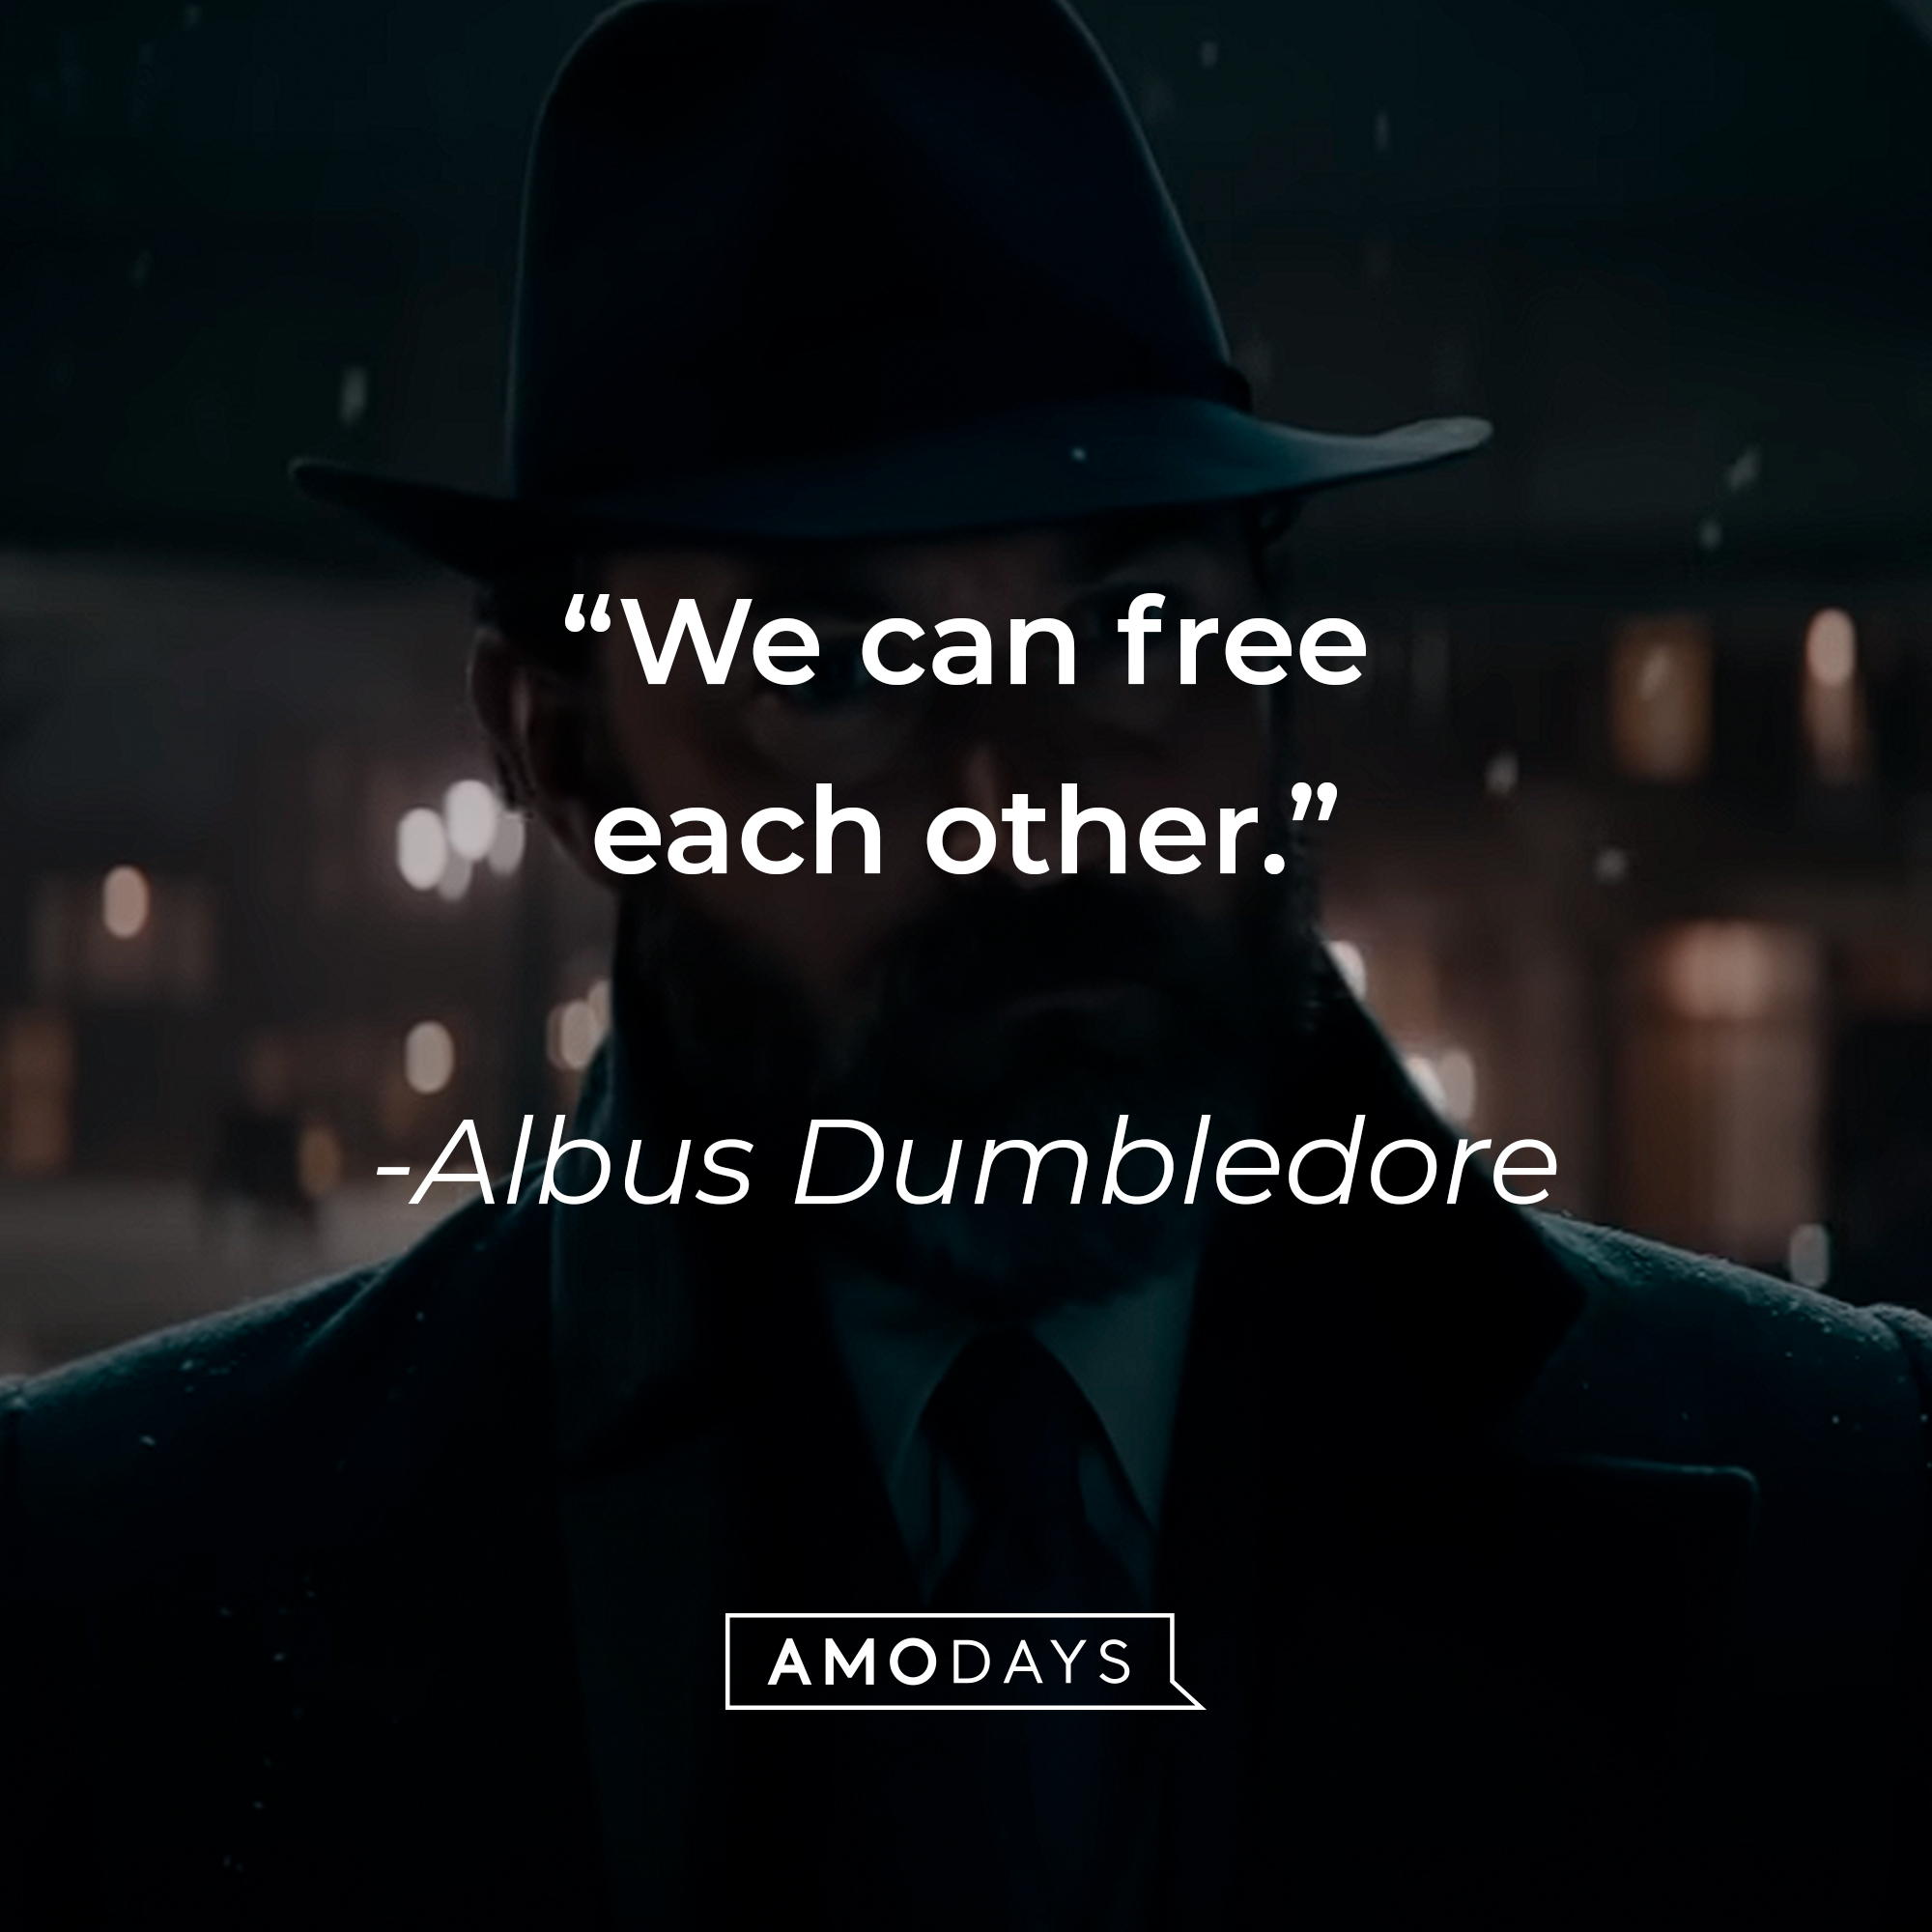 Albus Dumbledore, with his quote: "We can free each other." | Source: Youtube.com/WarnerBrosPictures